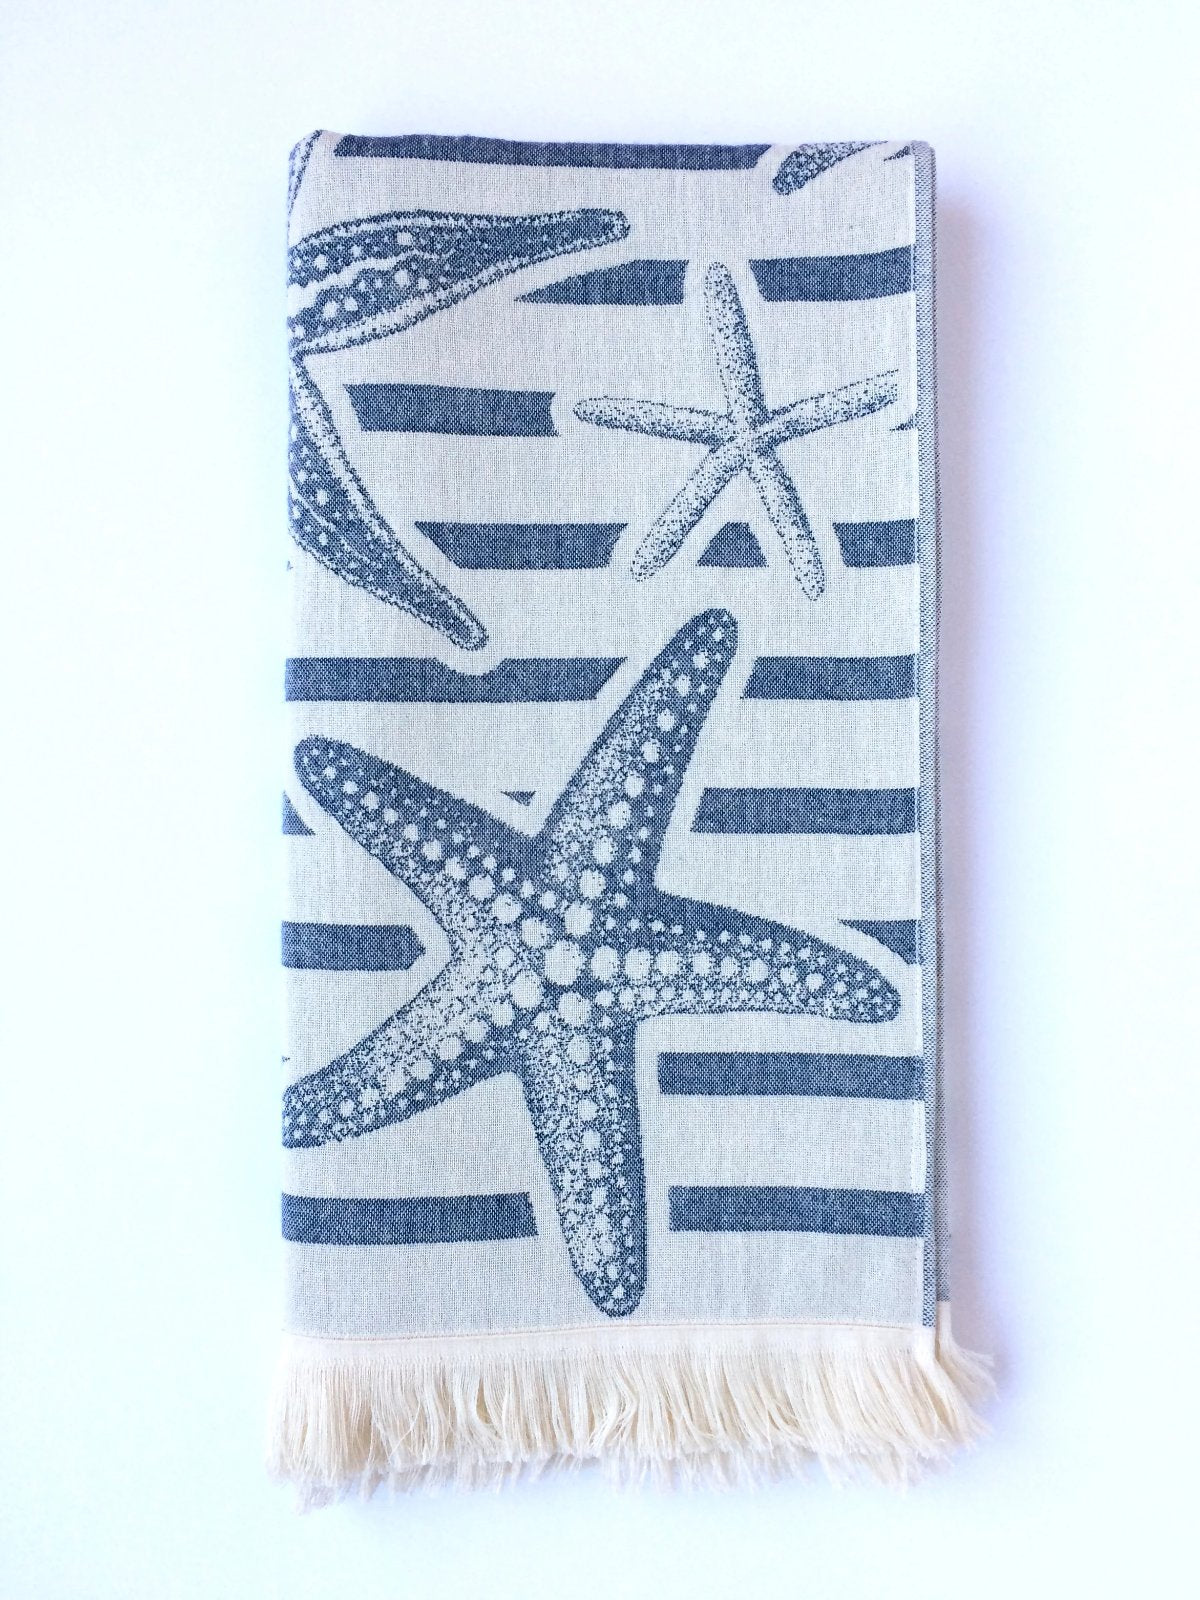 Turkish Towel with Starfish Design, Navy, Double Sided, for Beach Bath, absorbent durable 